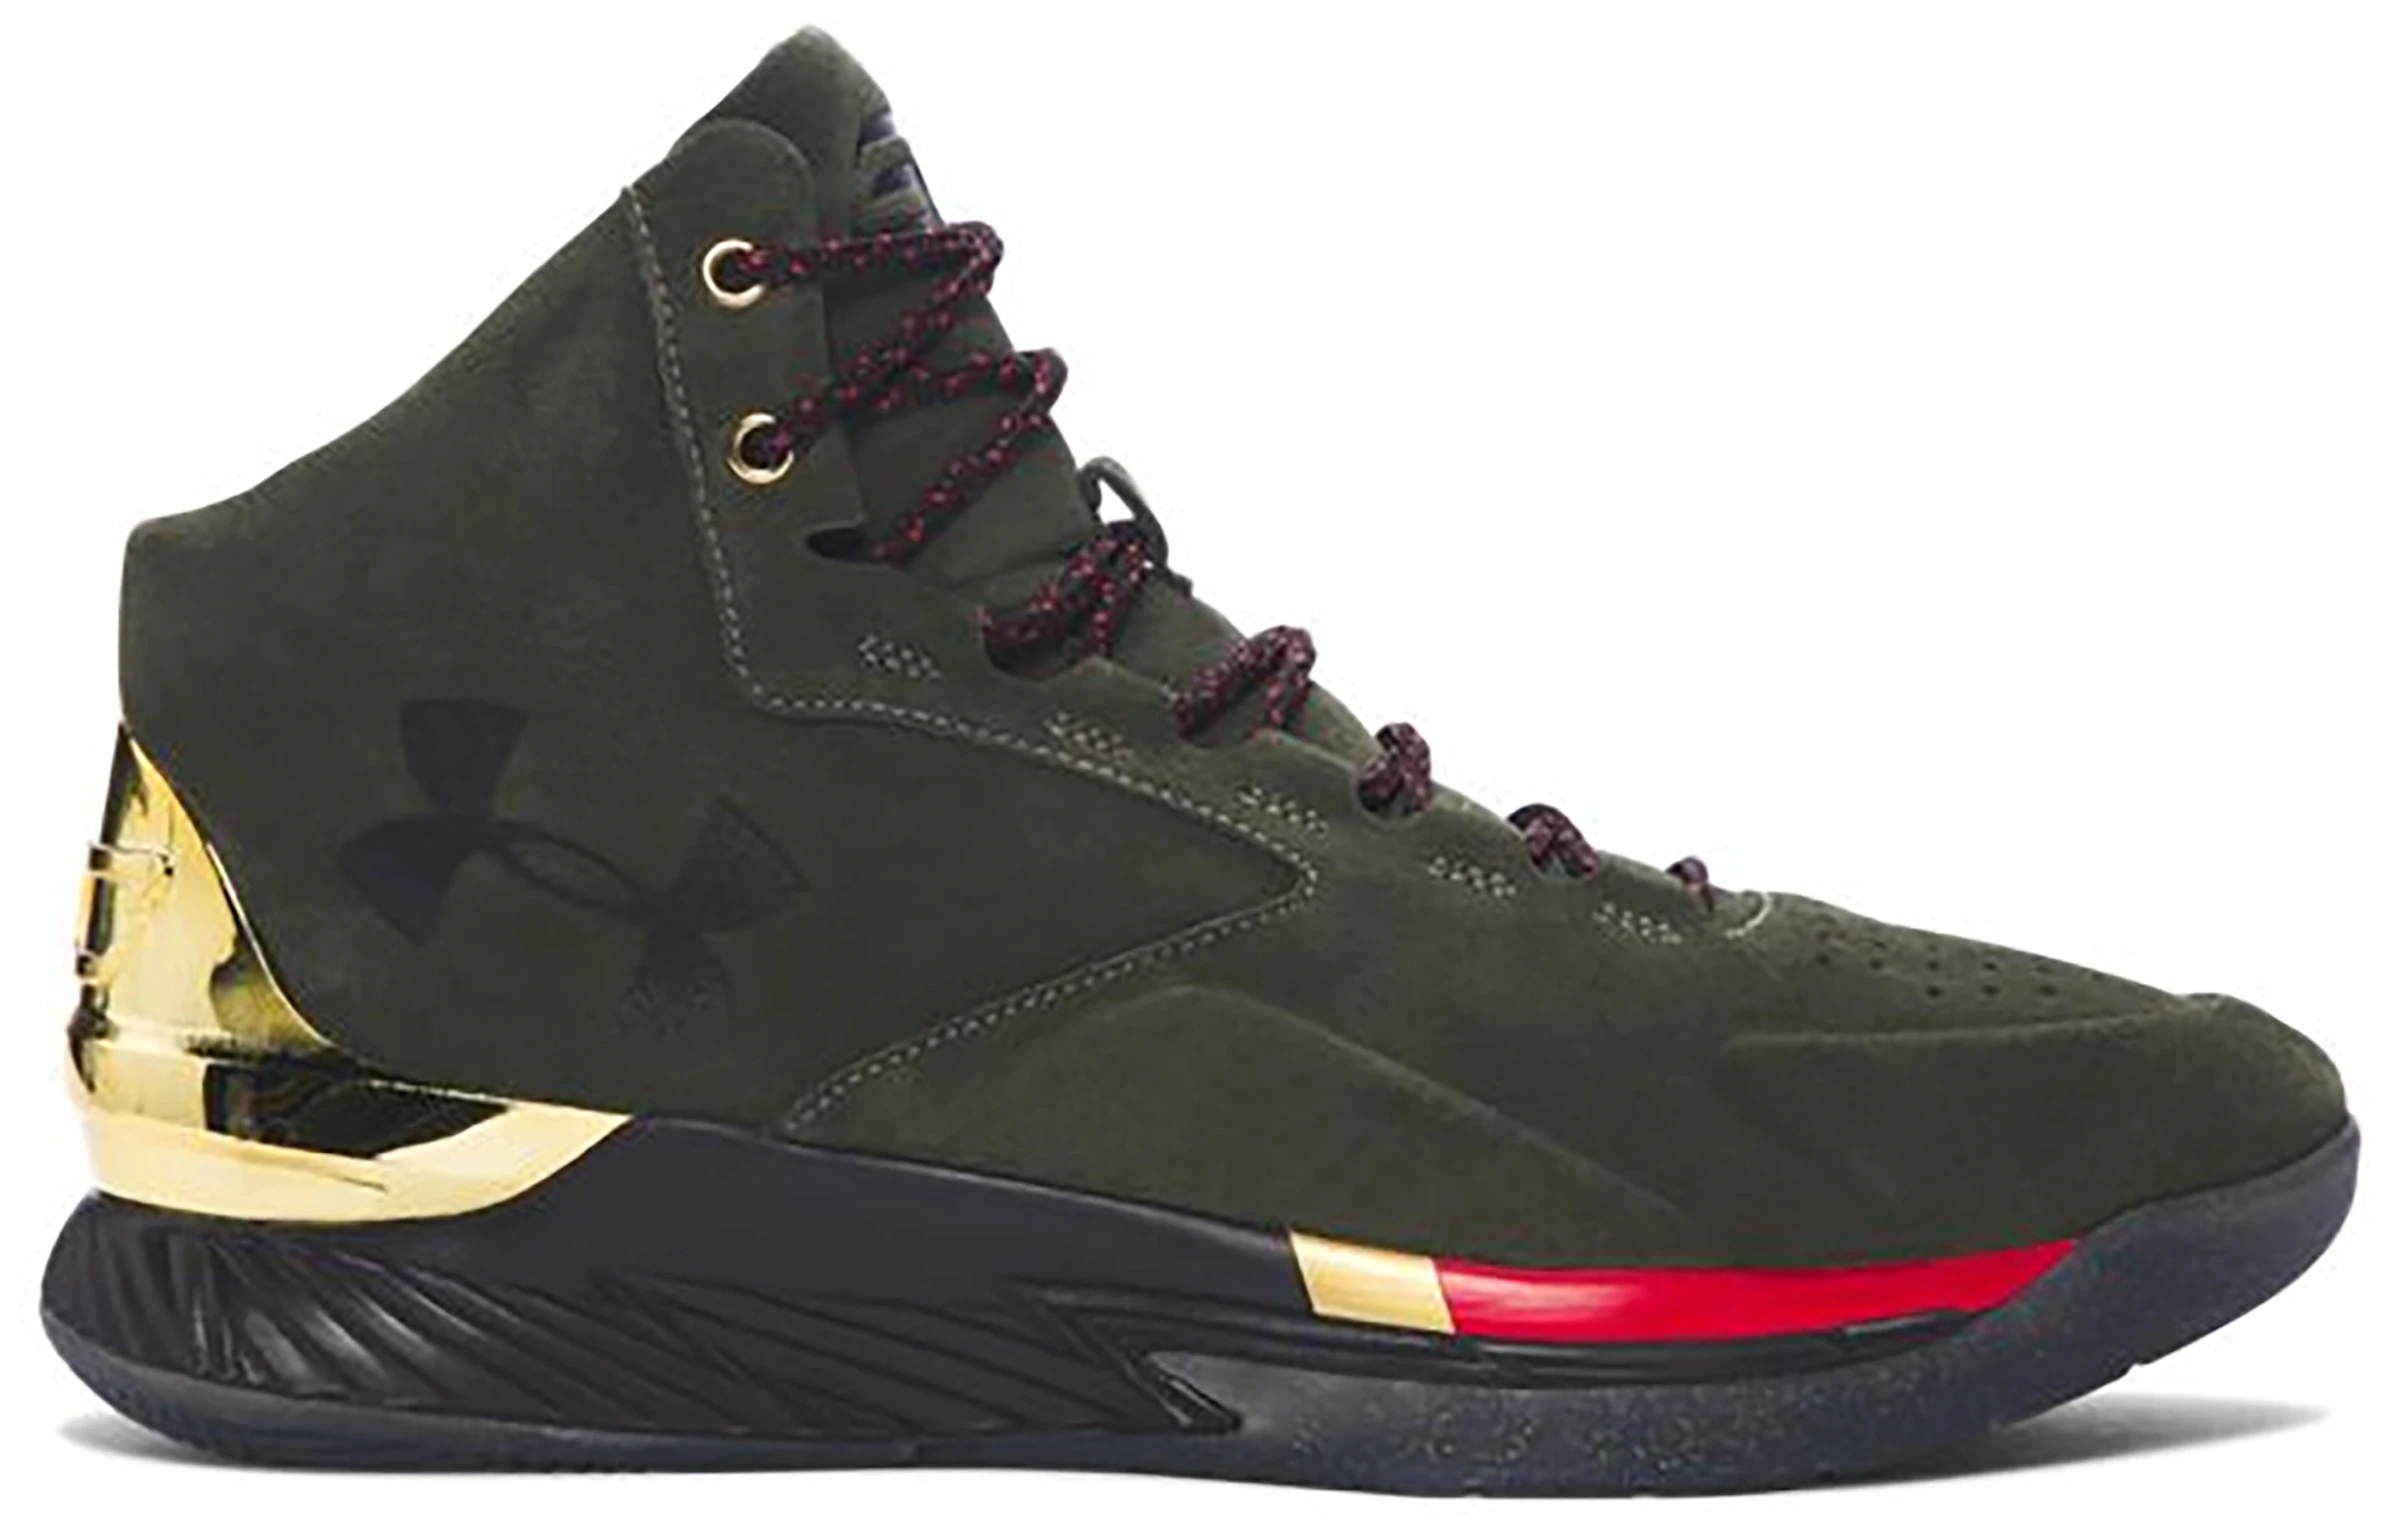 Under Armour Curry 1 Lux Downtown Green - 1296617-330 - ES